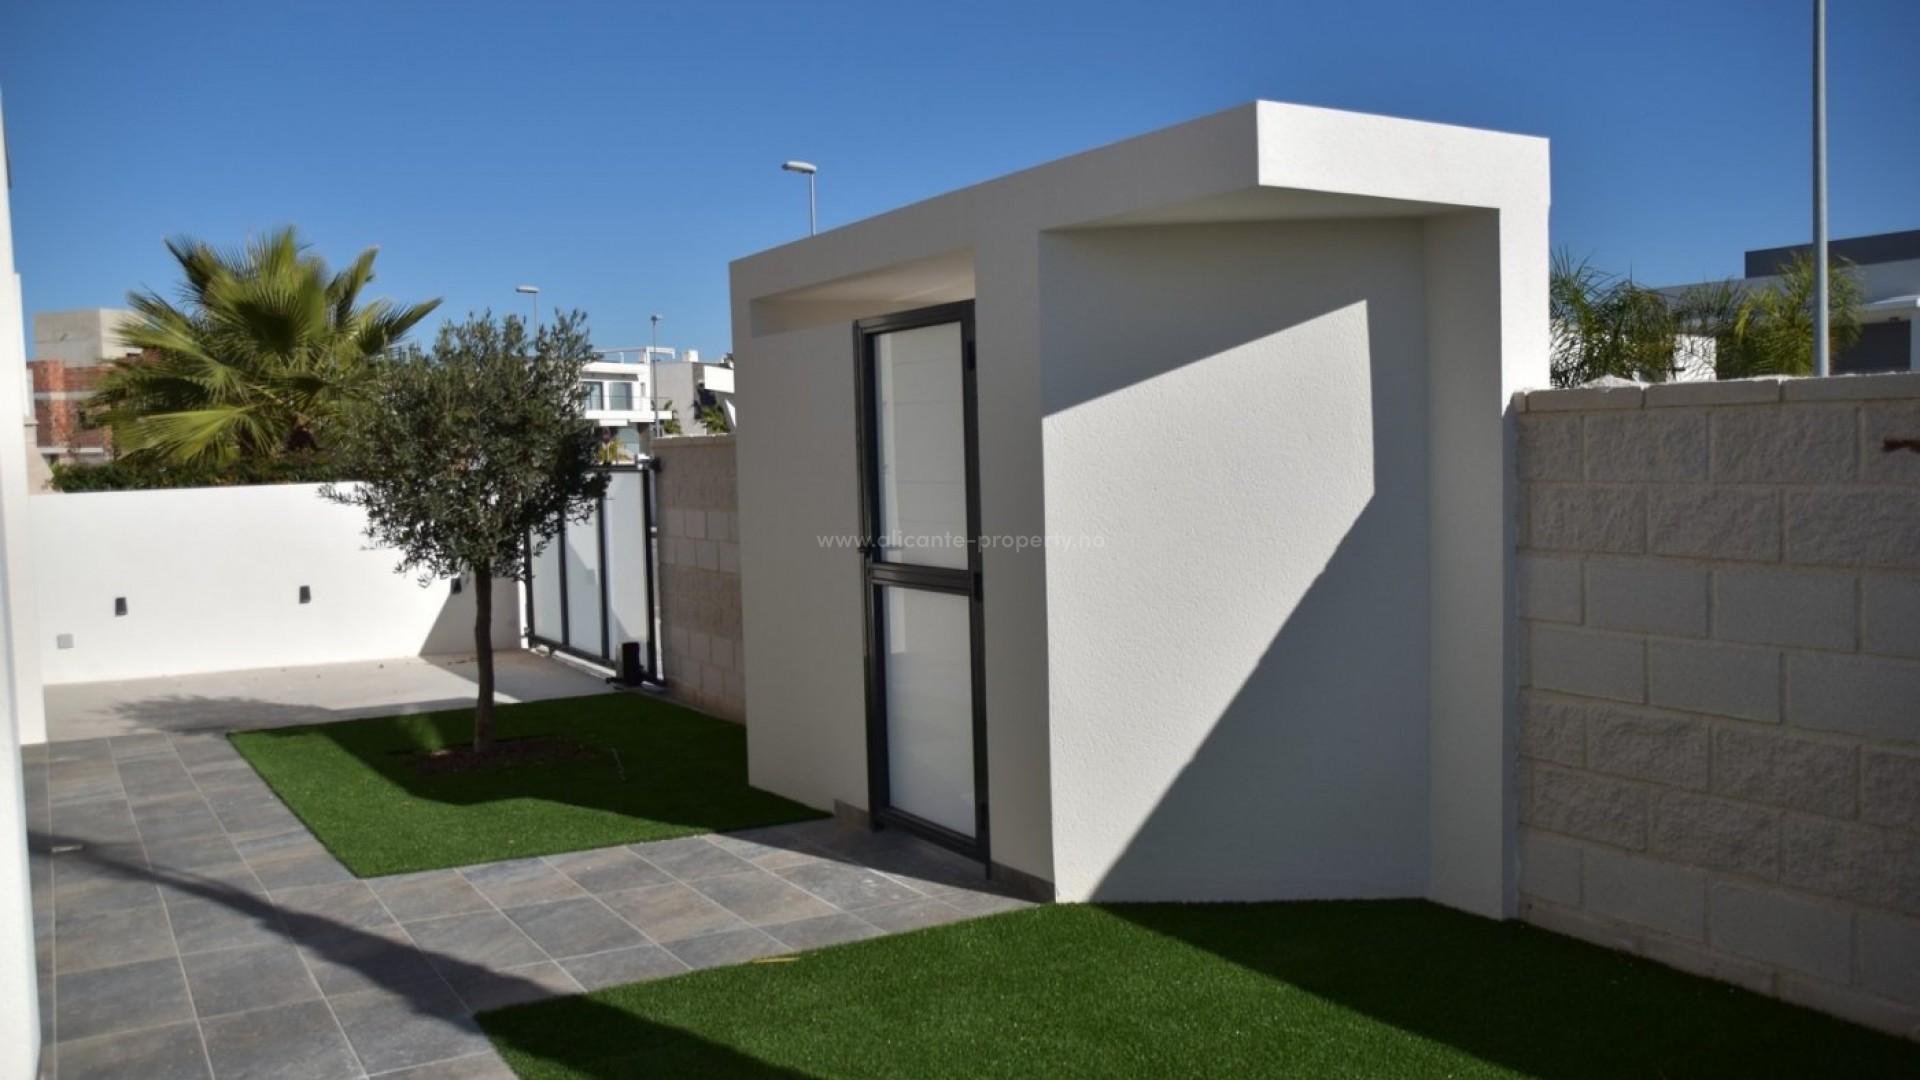 Brand new houses/villas in Benijofar, 3 bedrooms, 3 bathrooms, fully landscaped garden with private swimming pool and with a large solarium on the roof with beautiful views